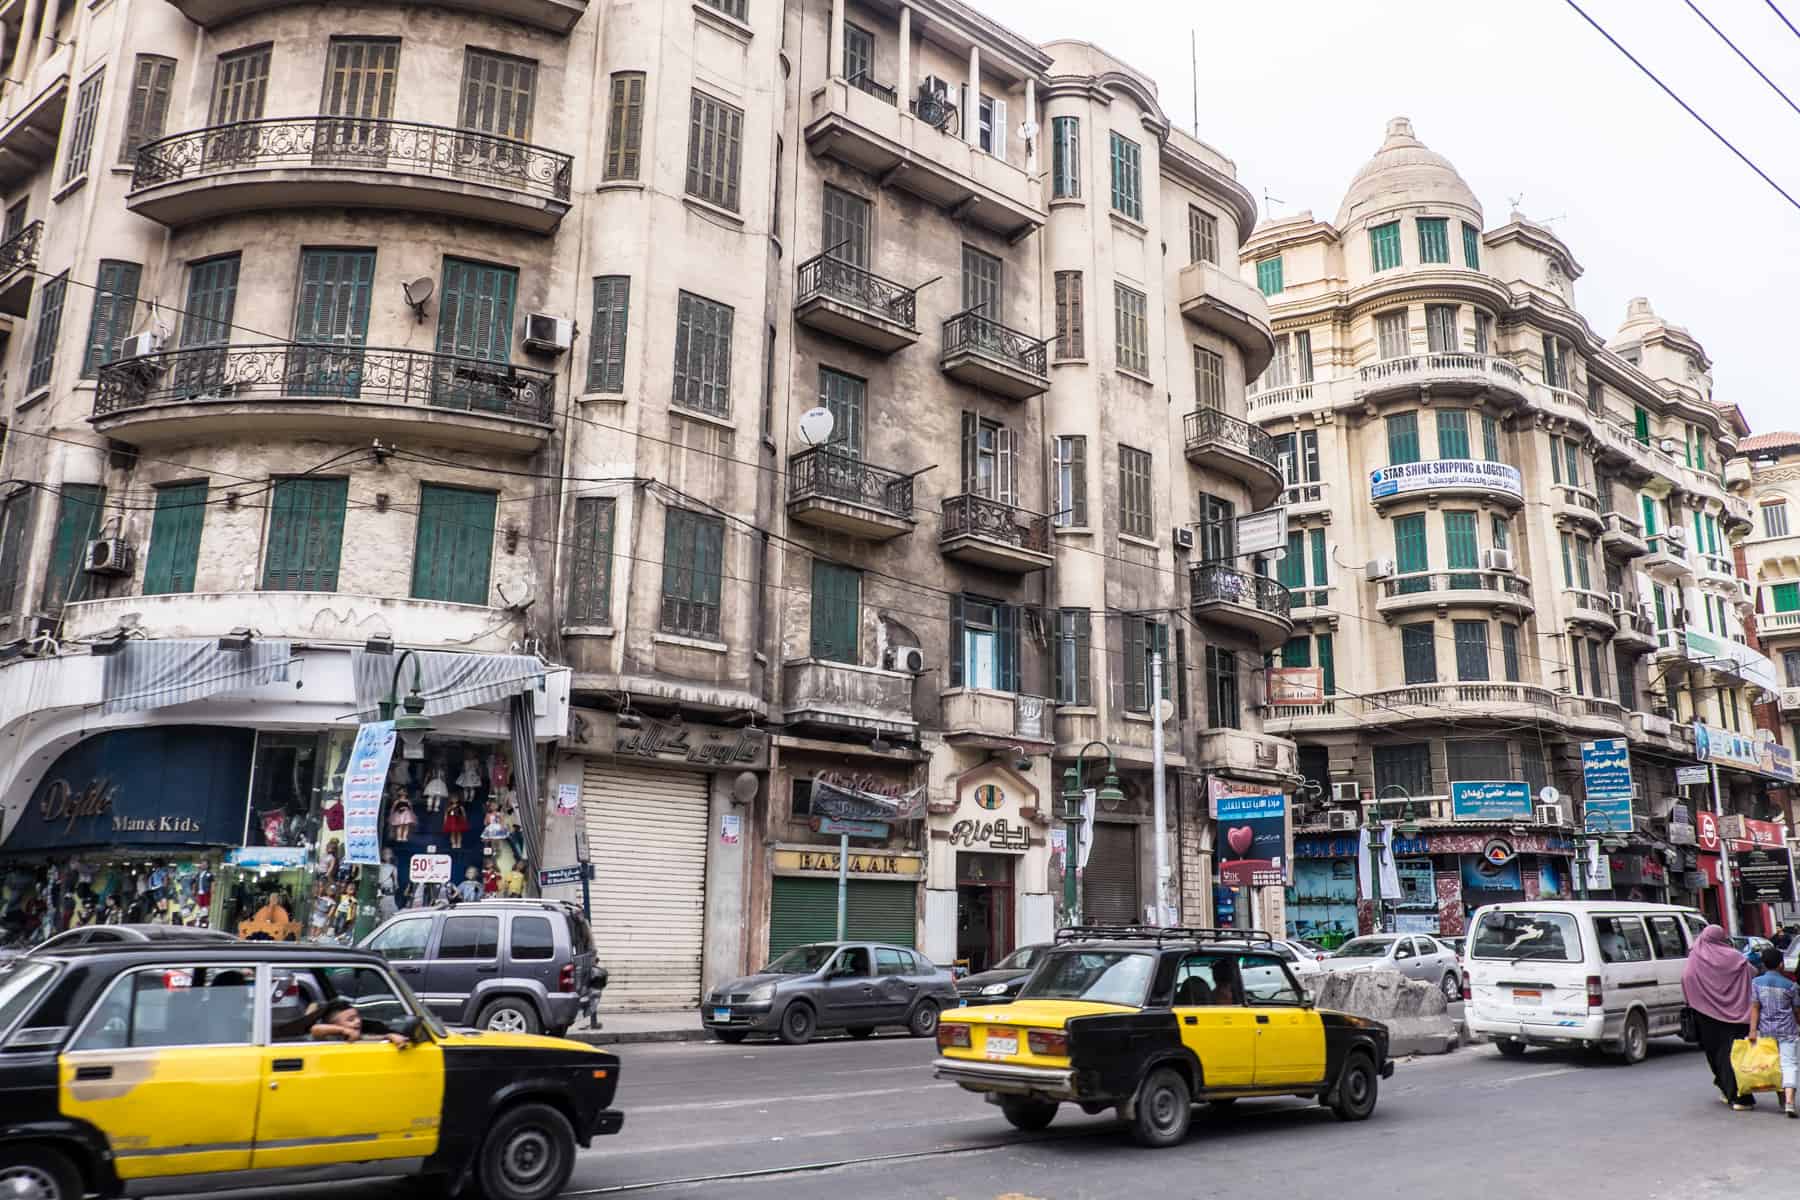 Yellow and black taxis pass by the tall light coloured buildings on a busy city street in the Mediterranean style city of Alexandria in Egypt